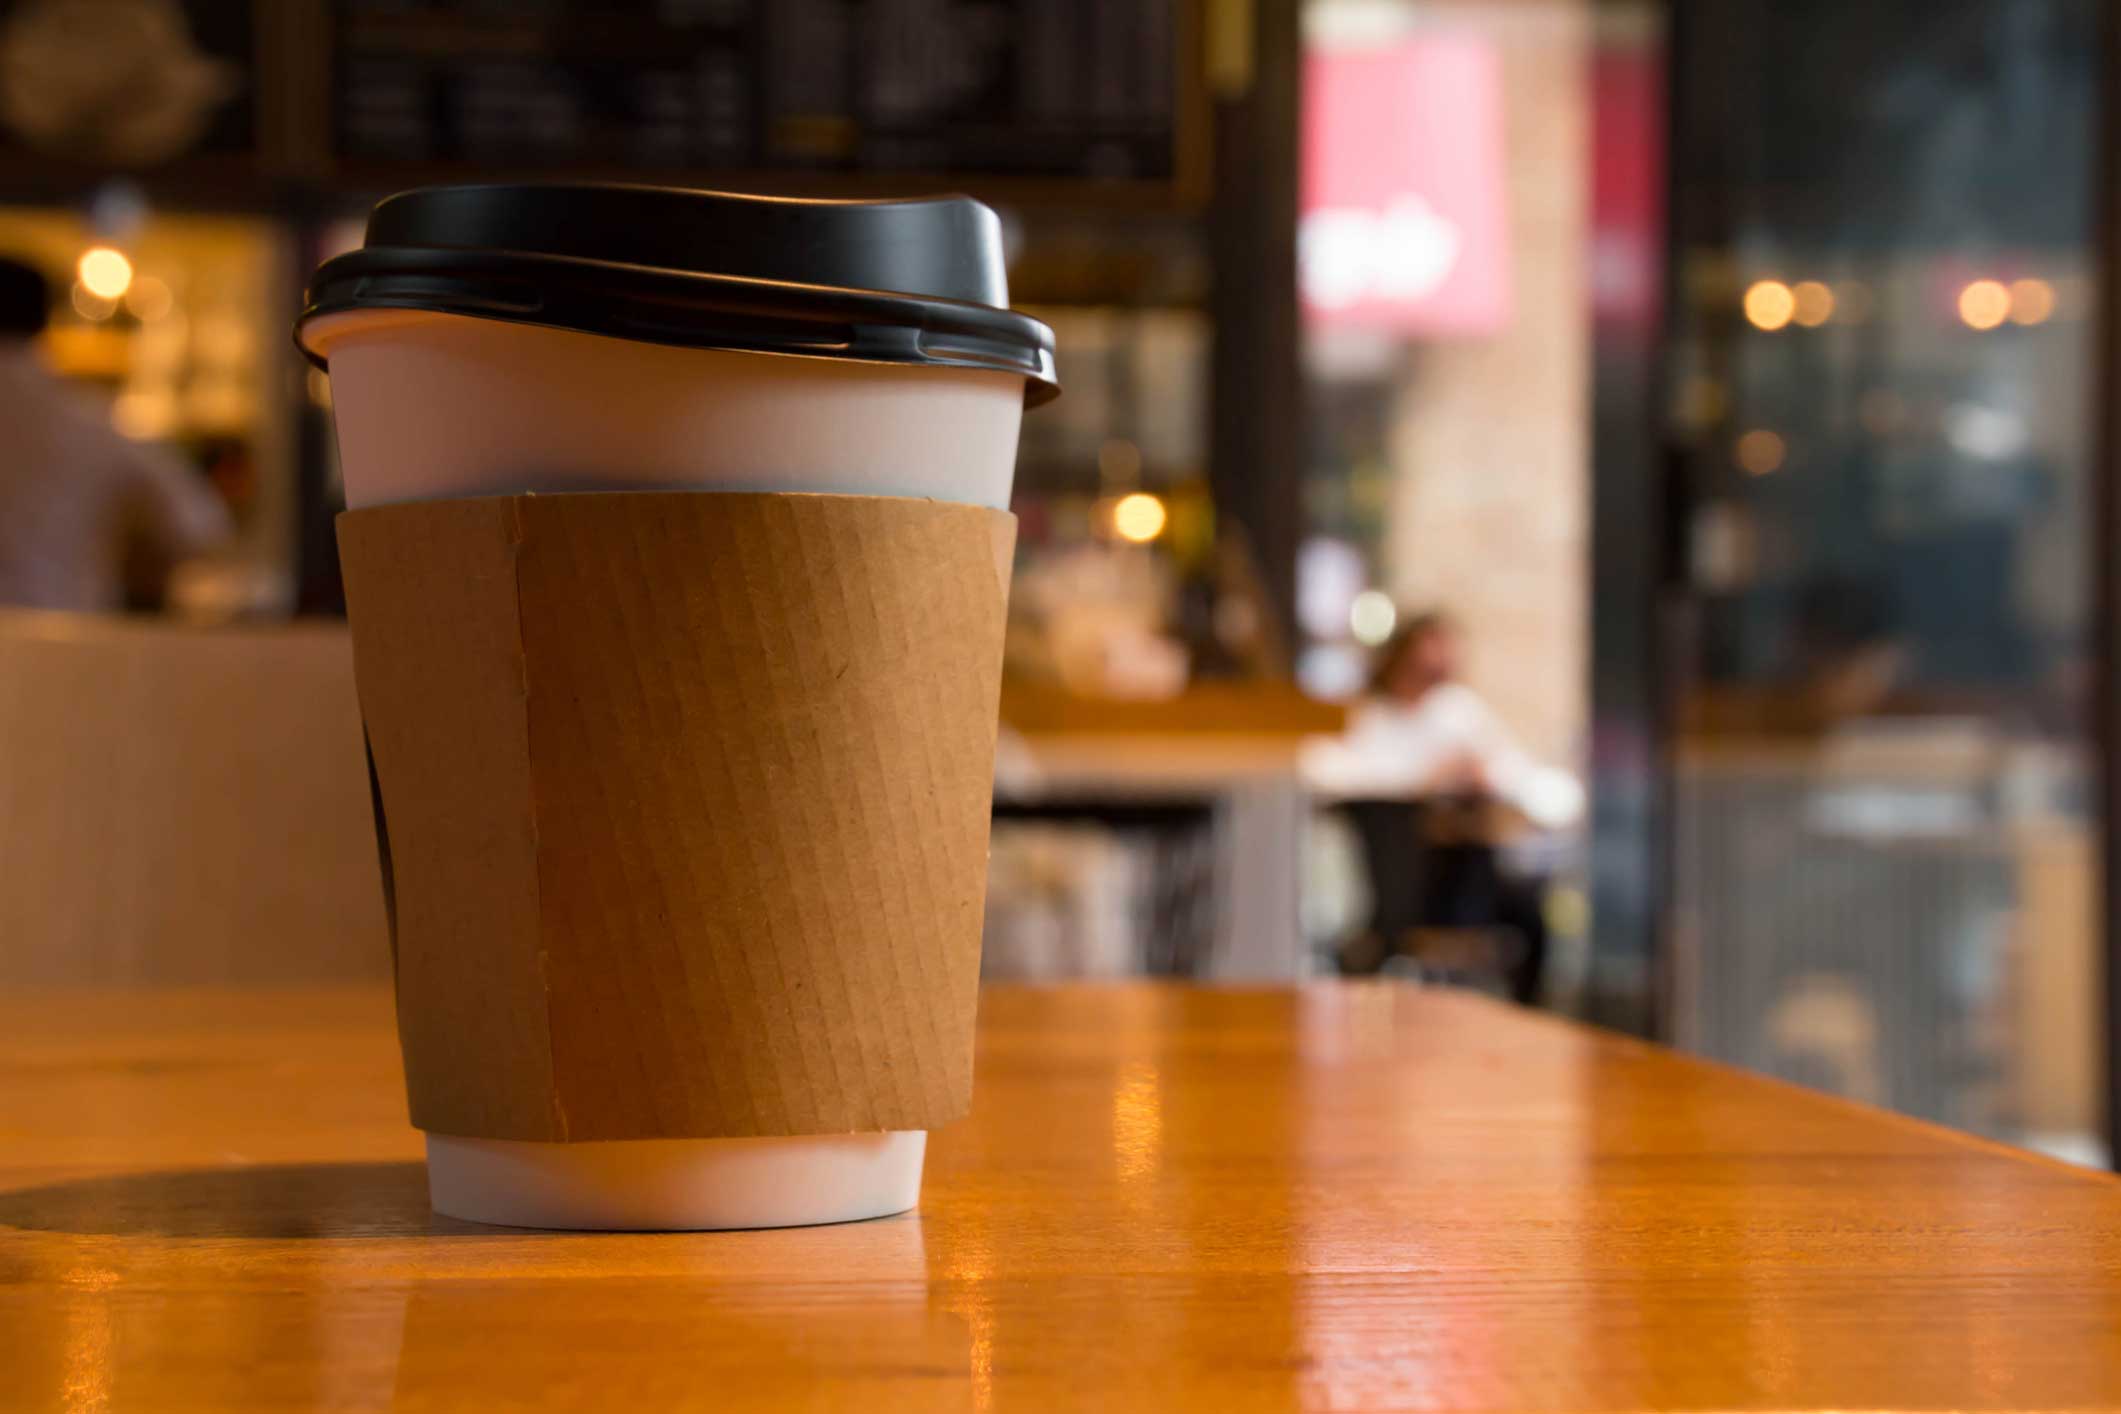 Study: Moderate Coffee Drinking Lowers Risk of Death, Cardiovascular Disease